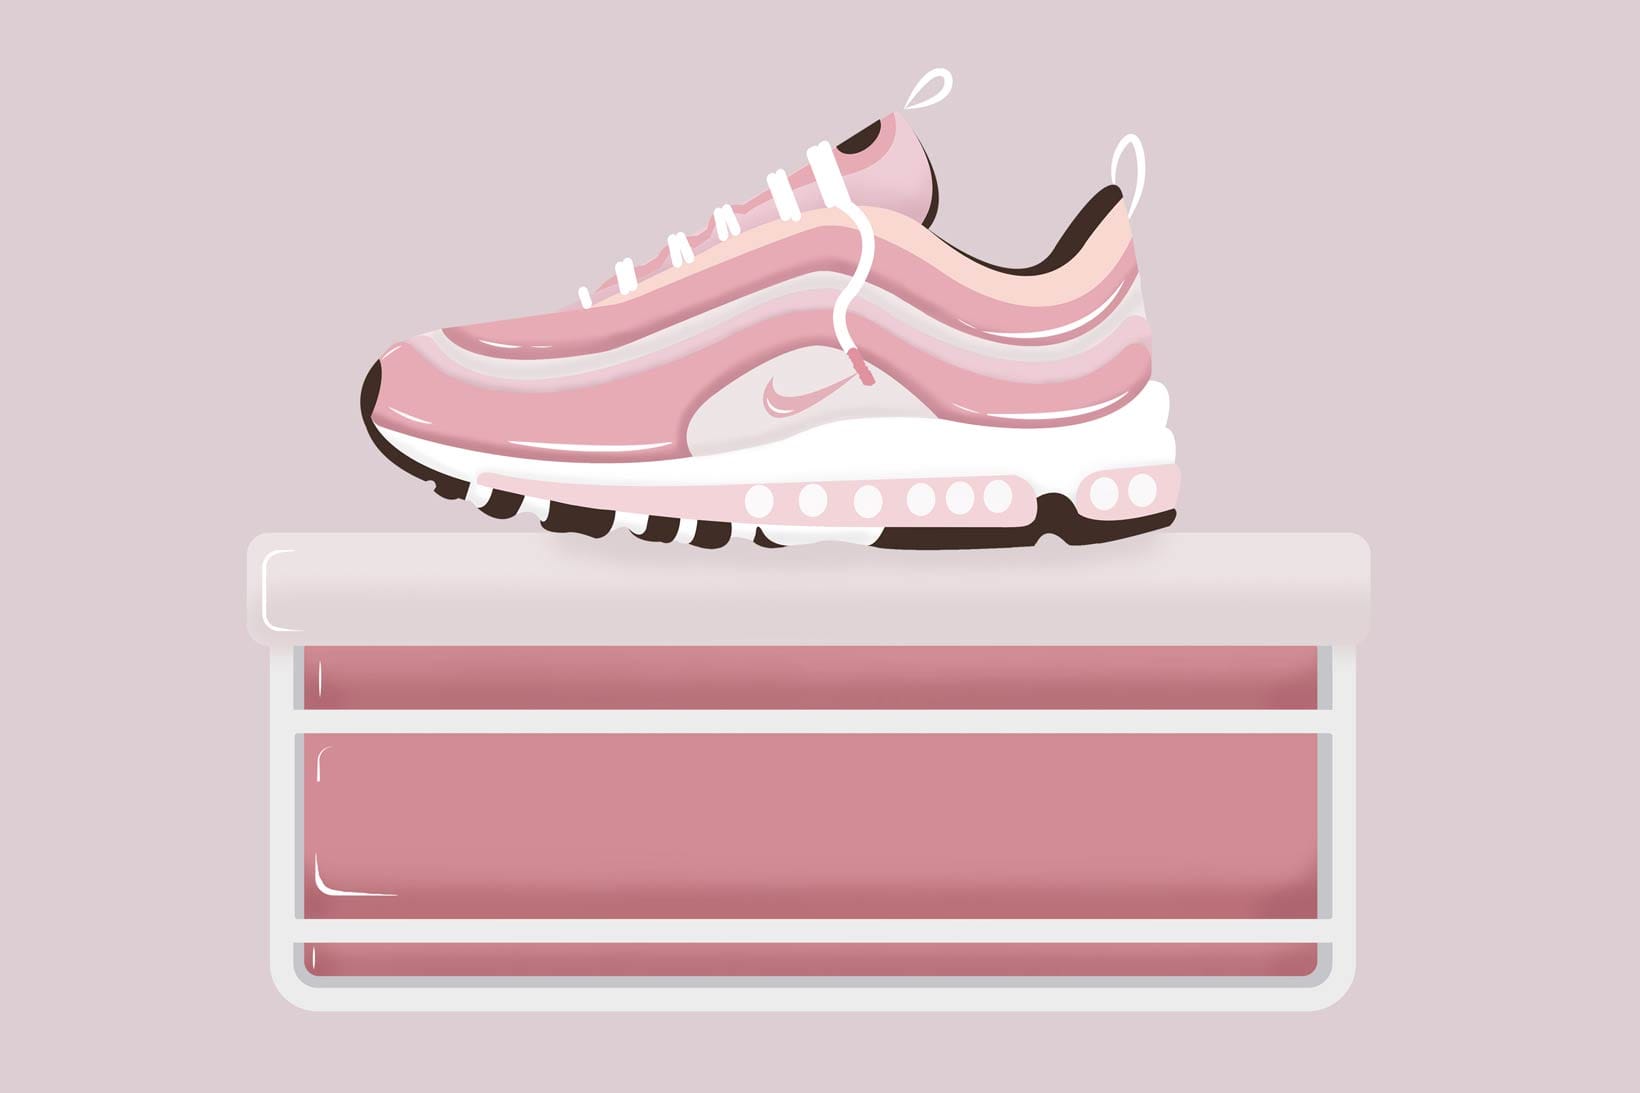 Illustrated Air Max Sneakers as Beauty 